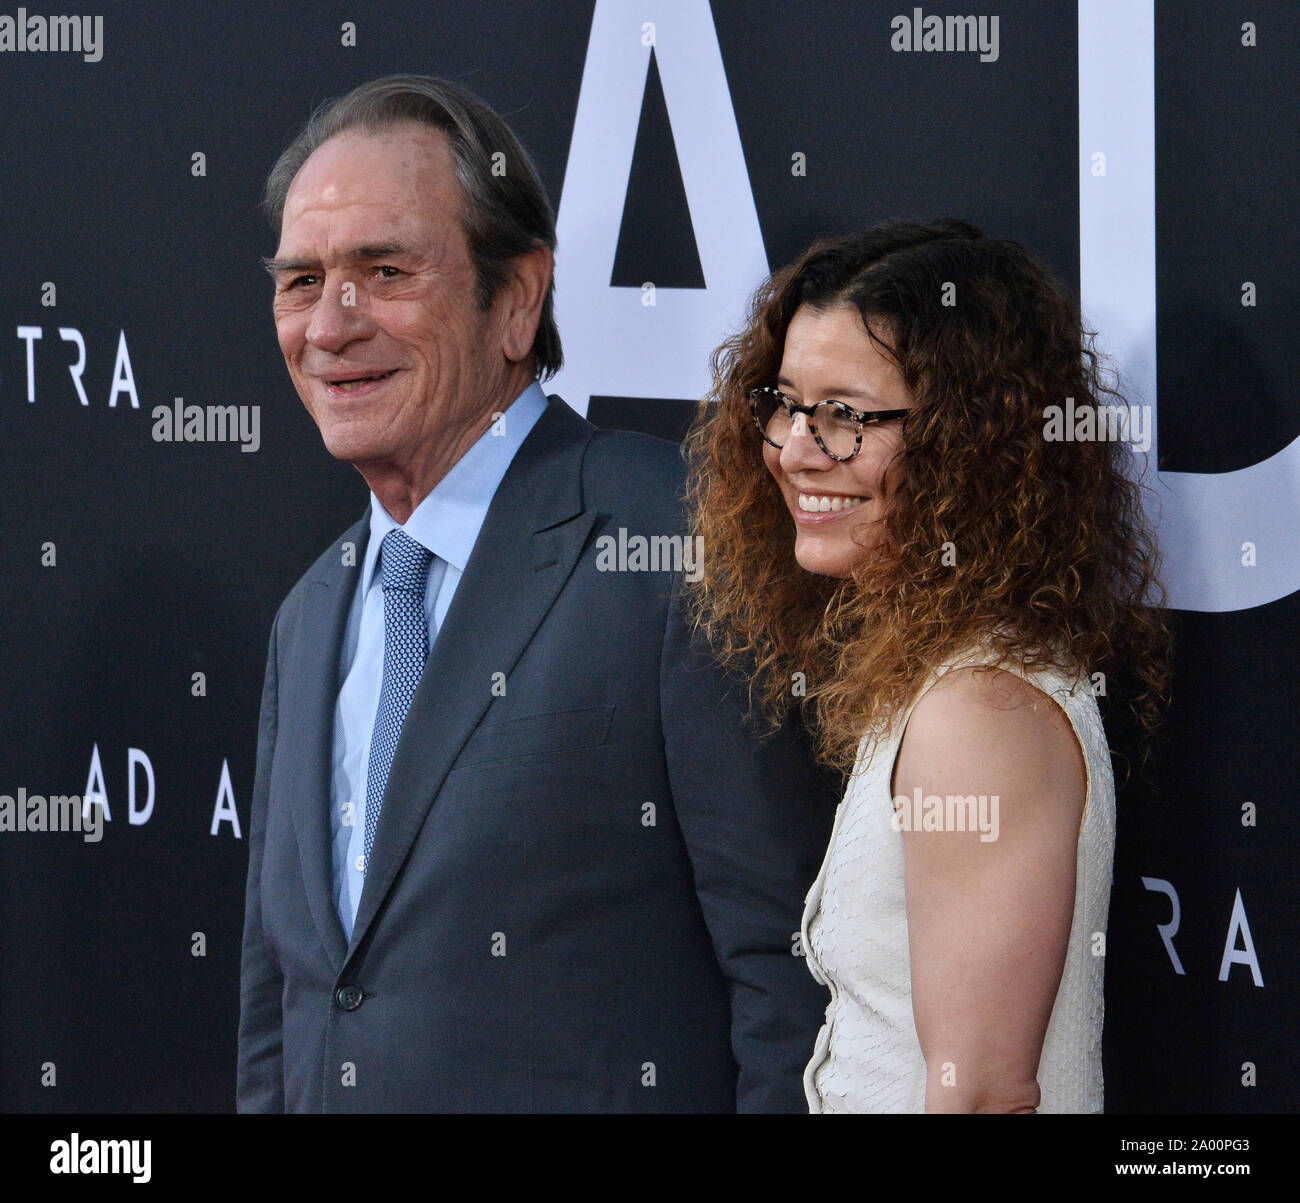 Cast member Tommy Lee Jones and his wife Dawn Laurel-Jones attend the premiere of the motion picture sci-fi thriller 'Ad Astra' at the ArcLight Cinerama Dome in the Hollywood section of Los Angeles on Wednesday, September 18, 2018. Storyline: Astronaut Roy McBride (Brad Pitt) travels to the outer edges of the solar system to find his missing father and unravel a mystery that threatens the survival of our planet. His journey will uncover secrets that challenge the nature of human existence and our place in the cosmos. Photo by Jim Ruymen/UPI Stock Photo